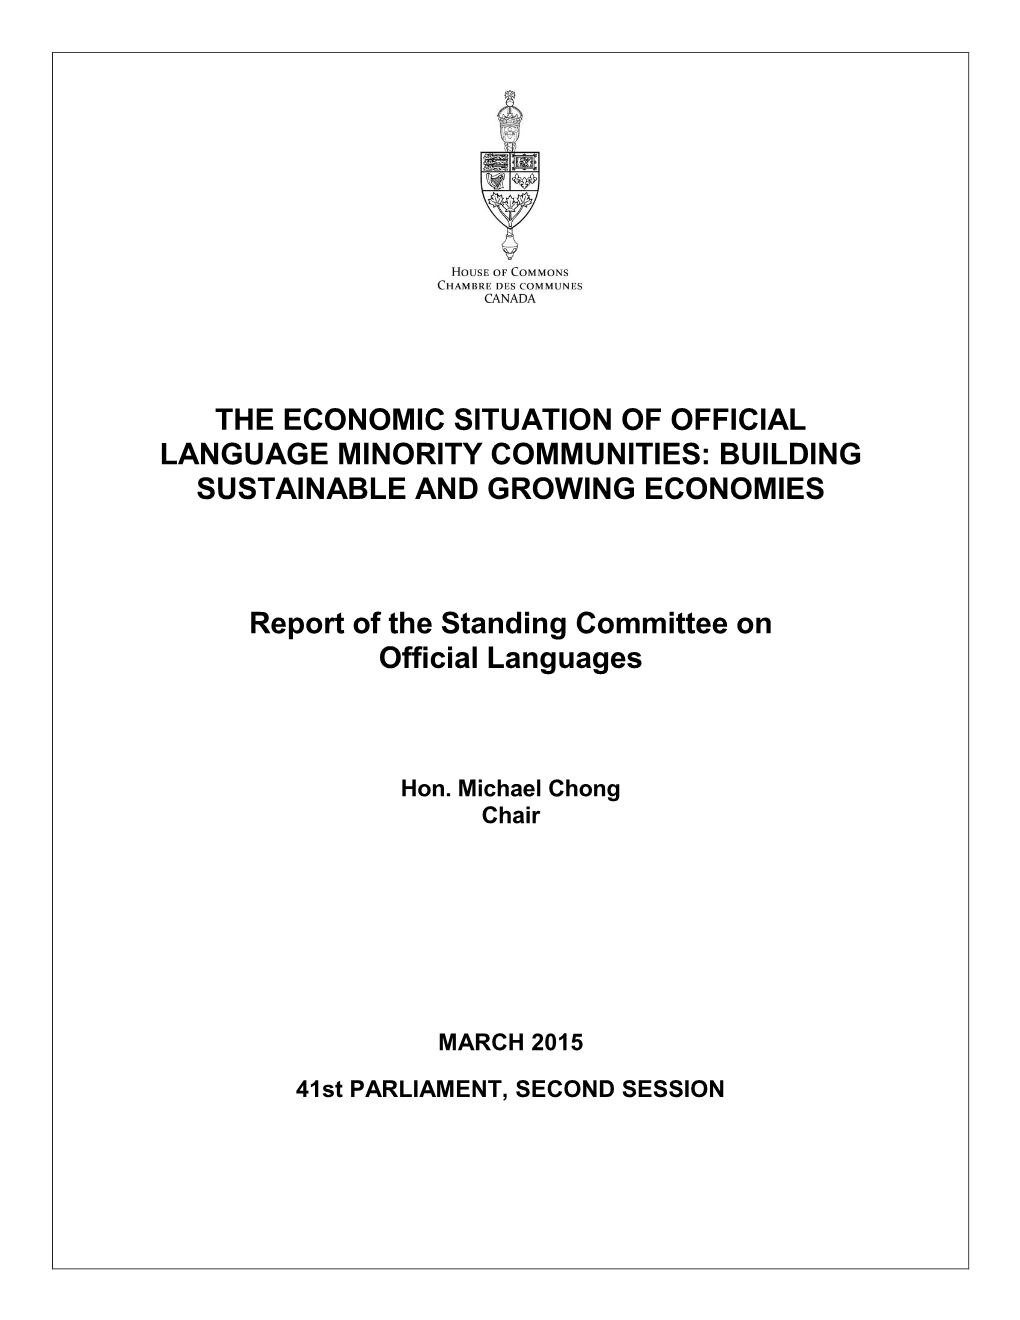 The Economic Situation of Official Language Minority Communities: Building Sustainable and Growing Economies